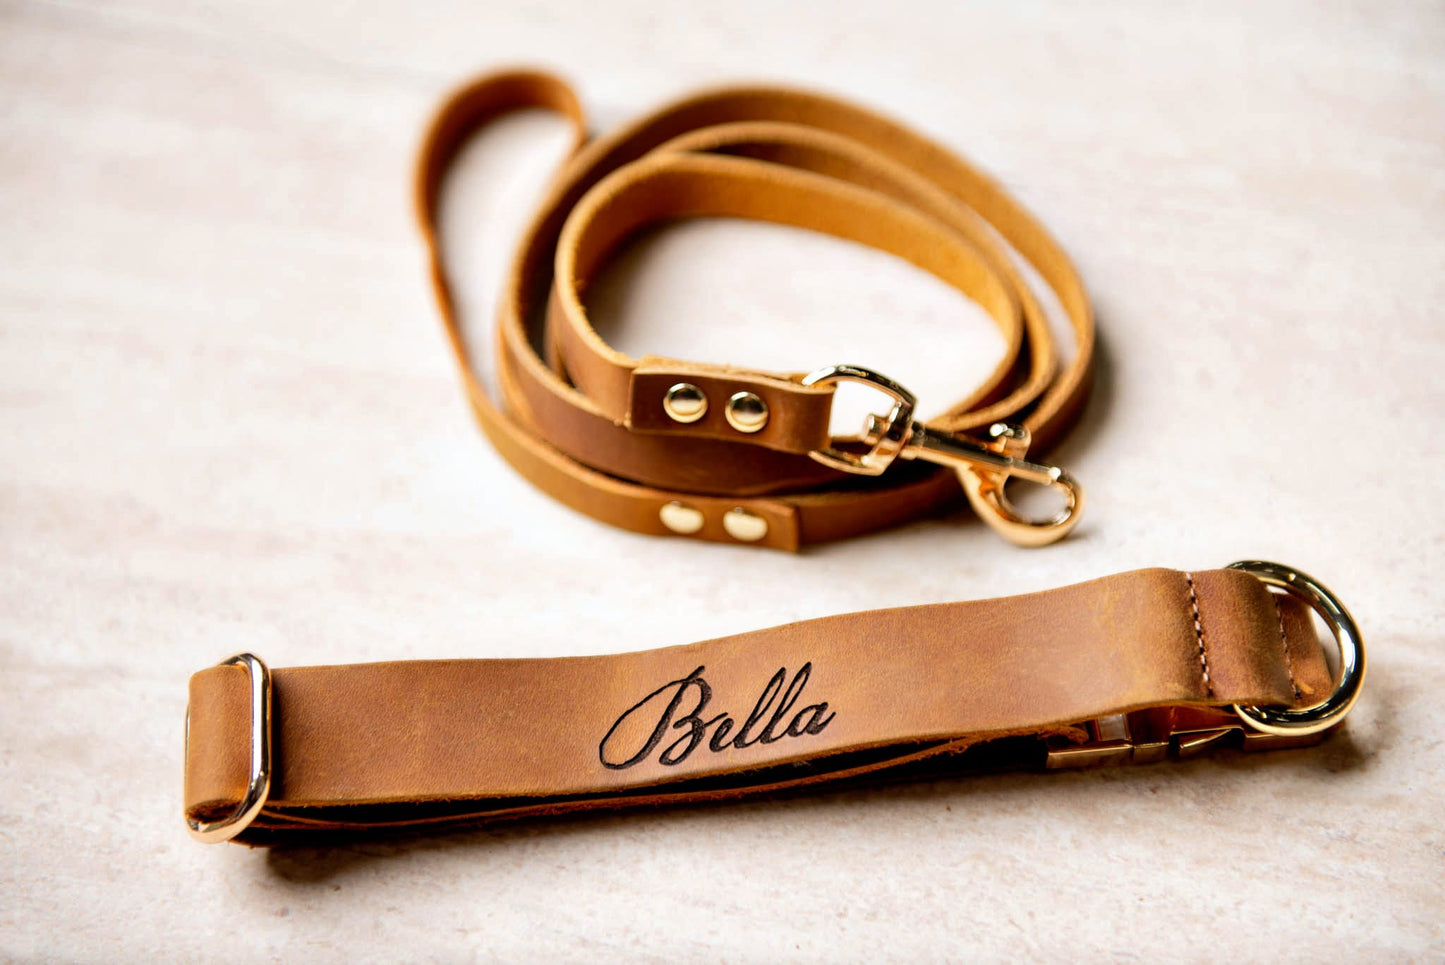 Personalized Distressed Leather Dog Collar With Metal Buckle and Optional Leash by Left Coast Original